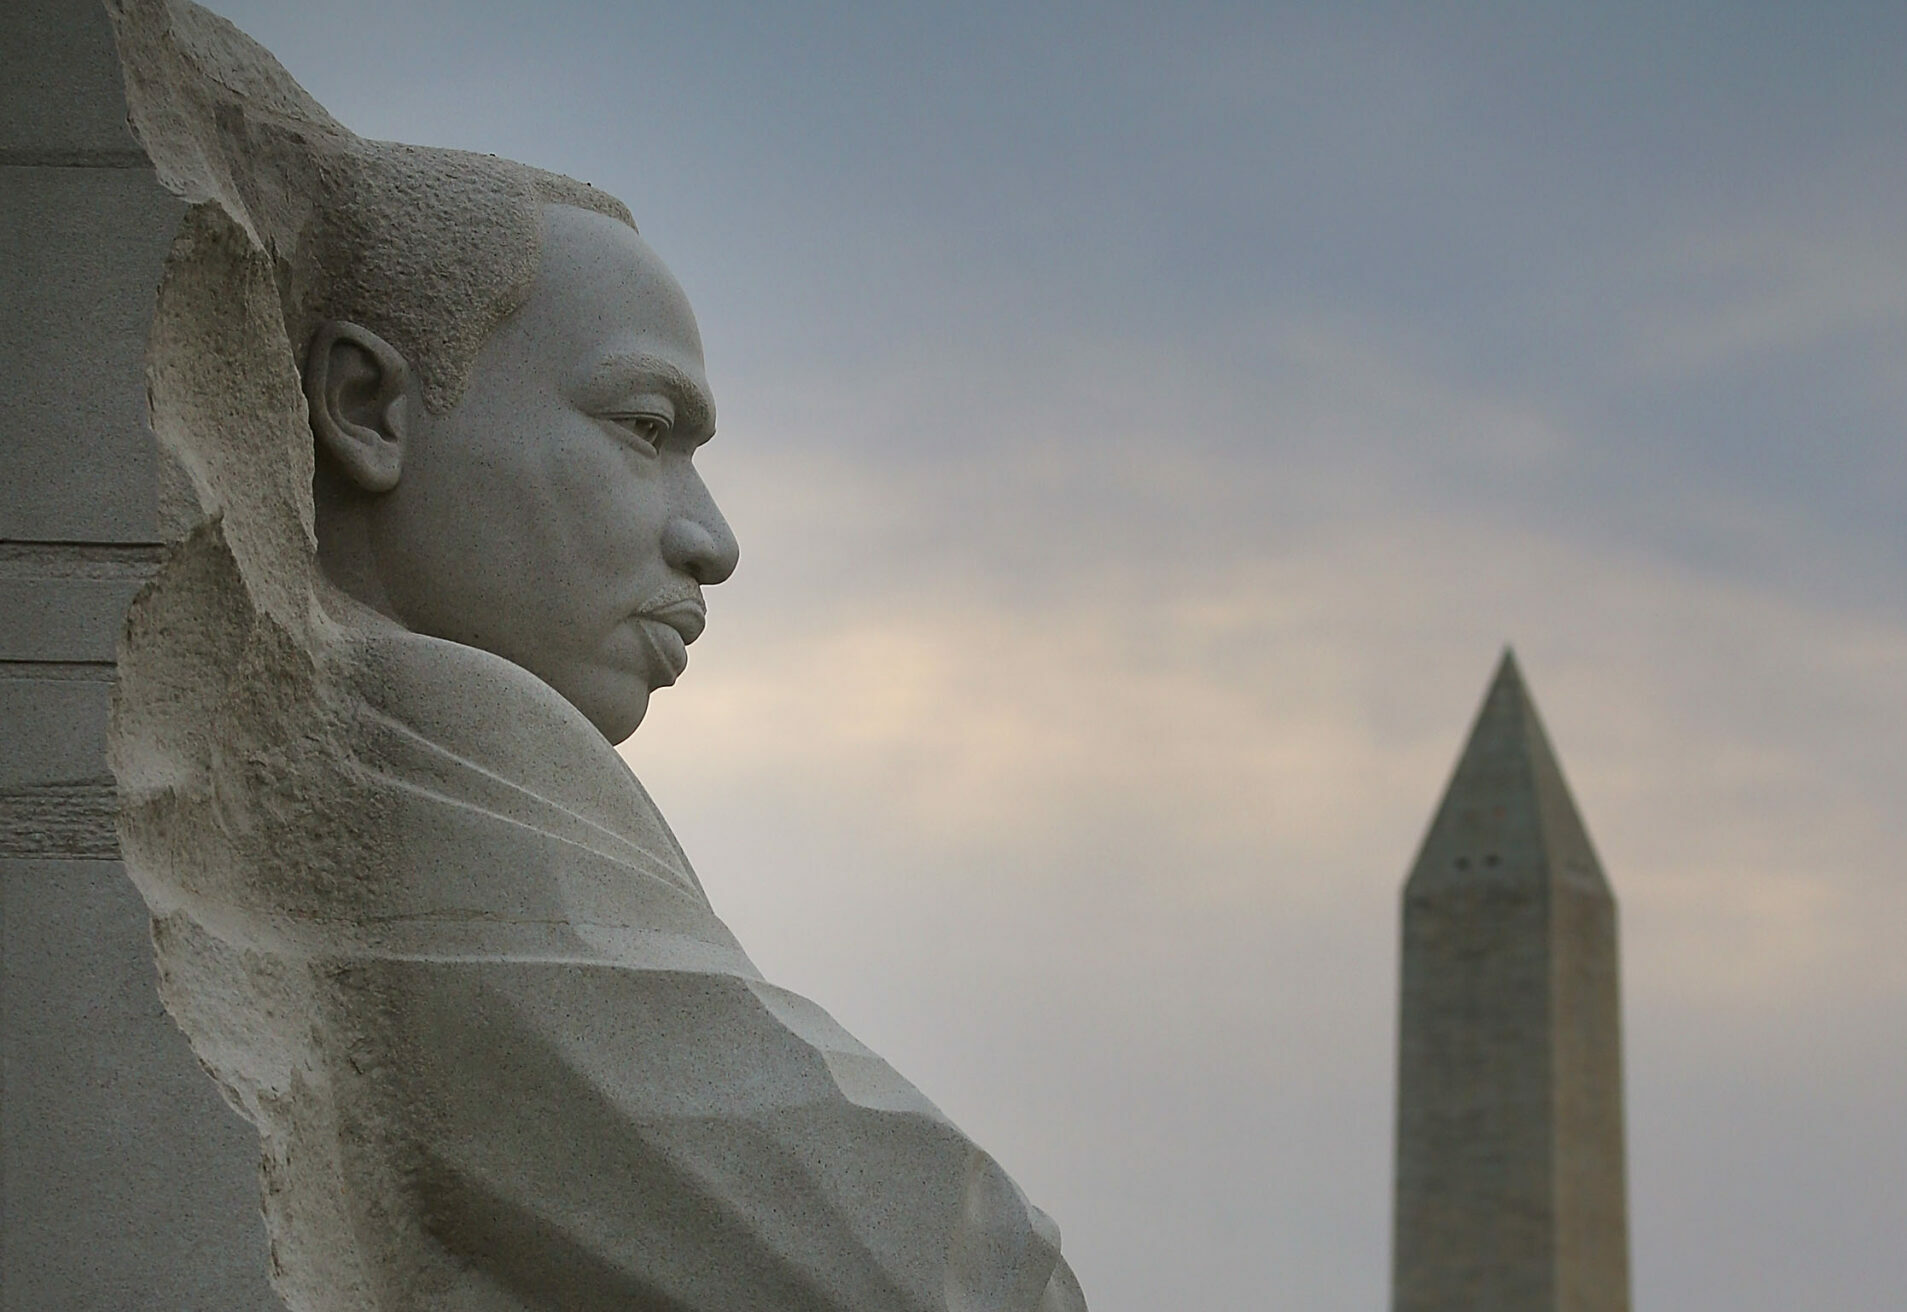 <h1 class="tribe-events-single-event-title">Martin Luther King Jr. Events Happening Across Louisville 1/16/23</h1>